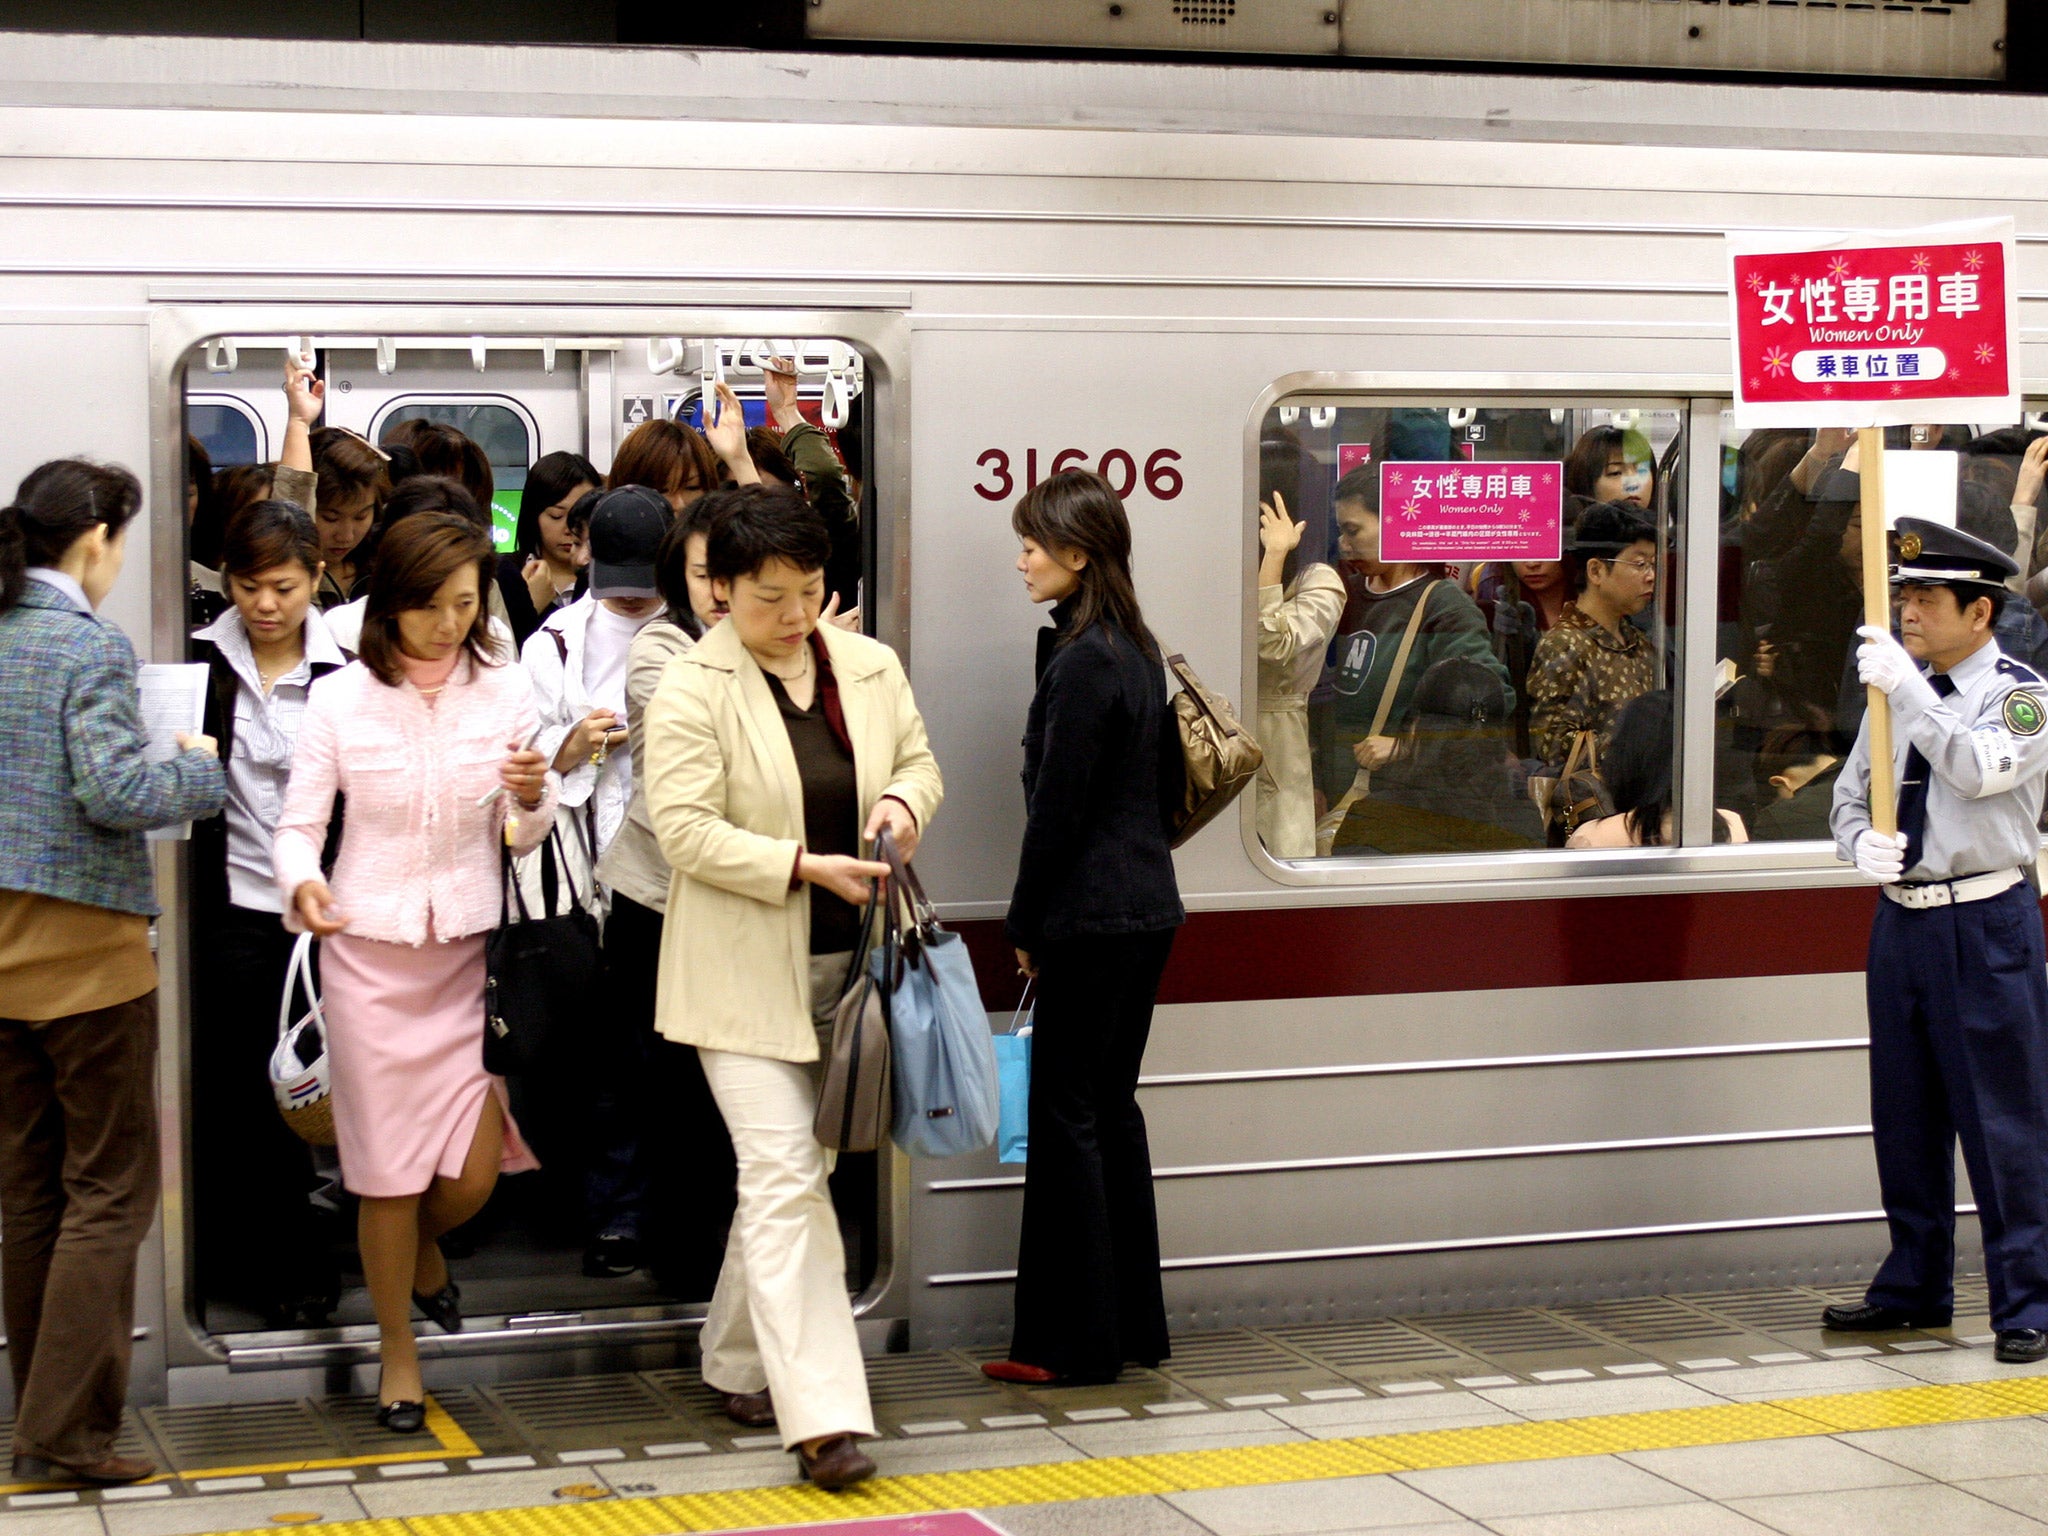 Female passengers come out from a 'women only' carriage at a metro station in Tokyo, Japan